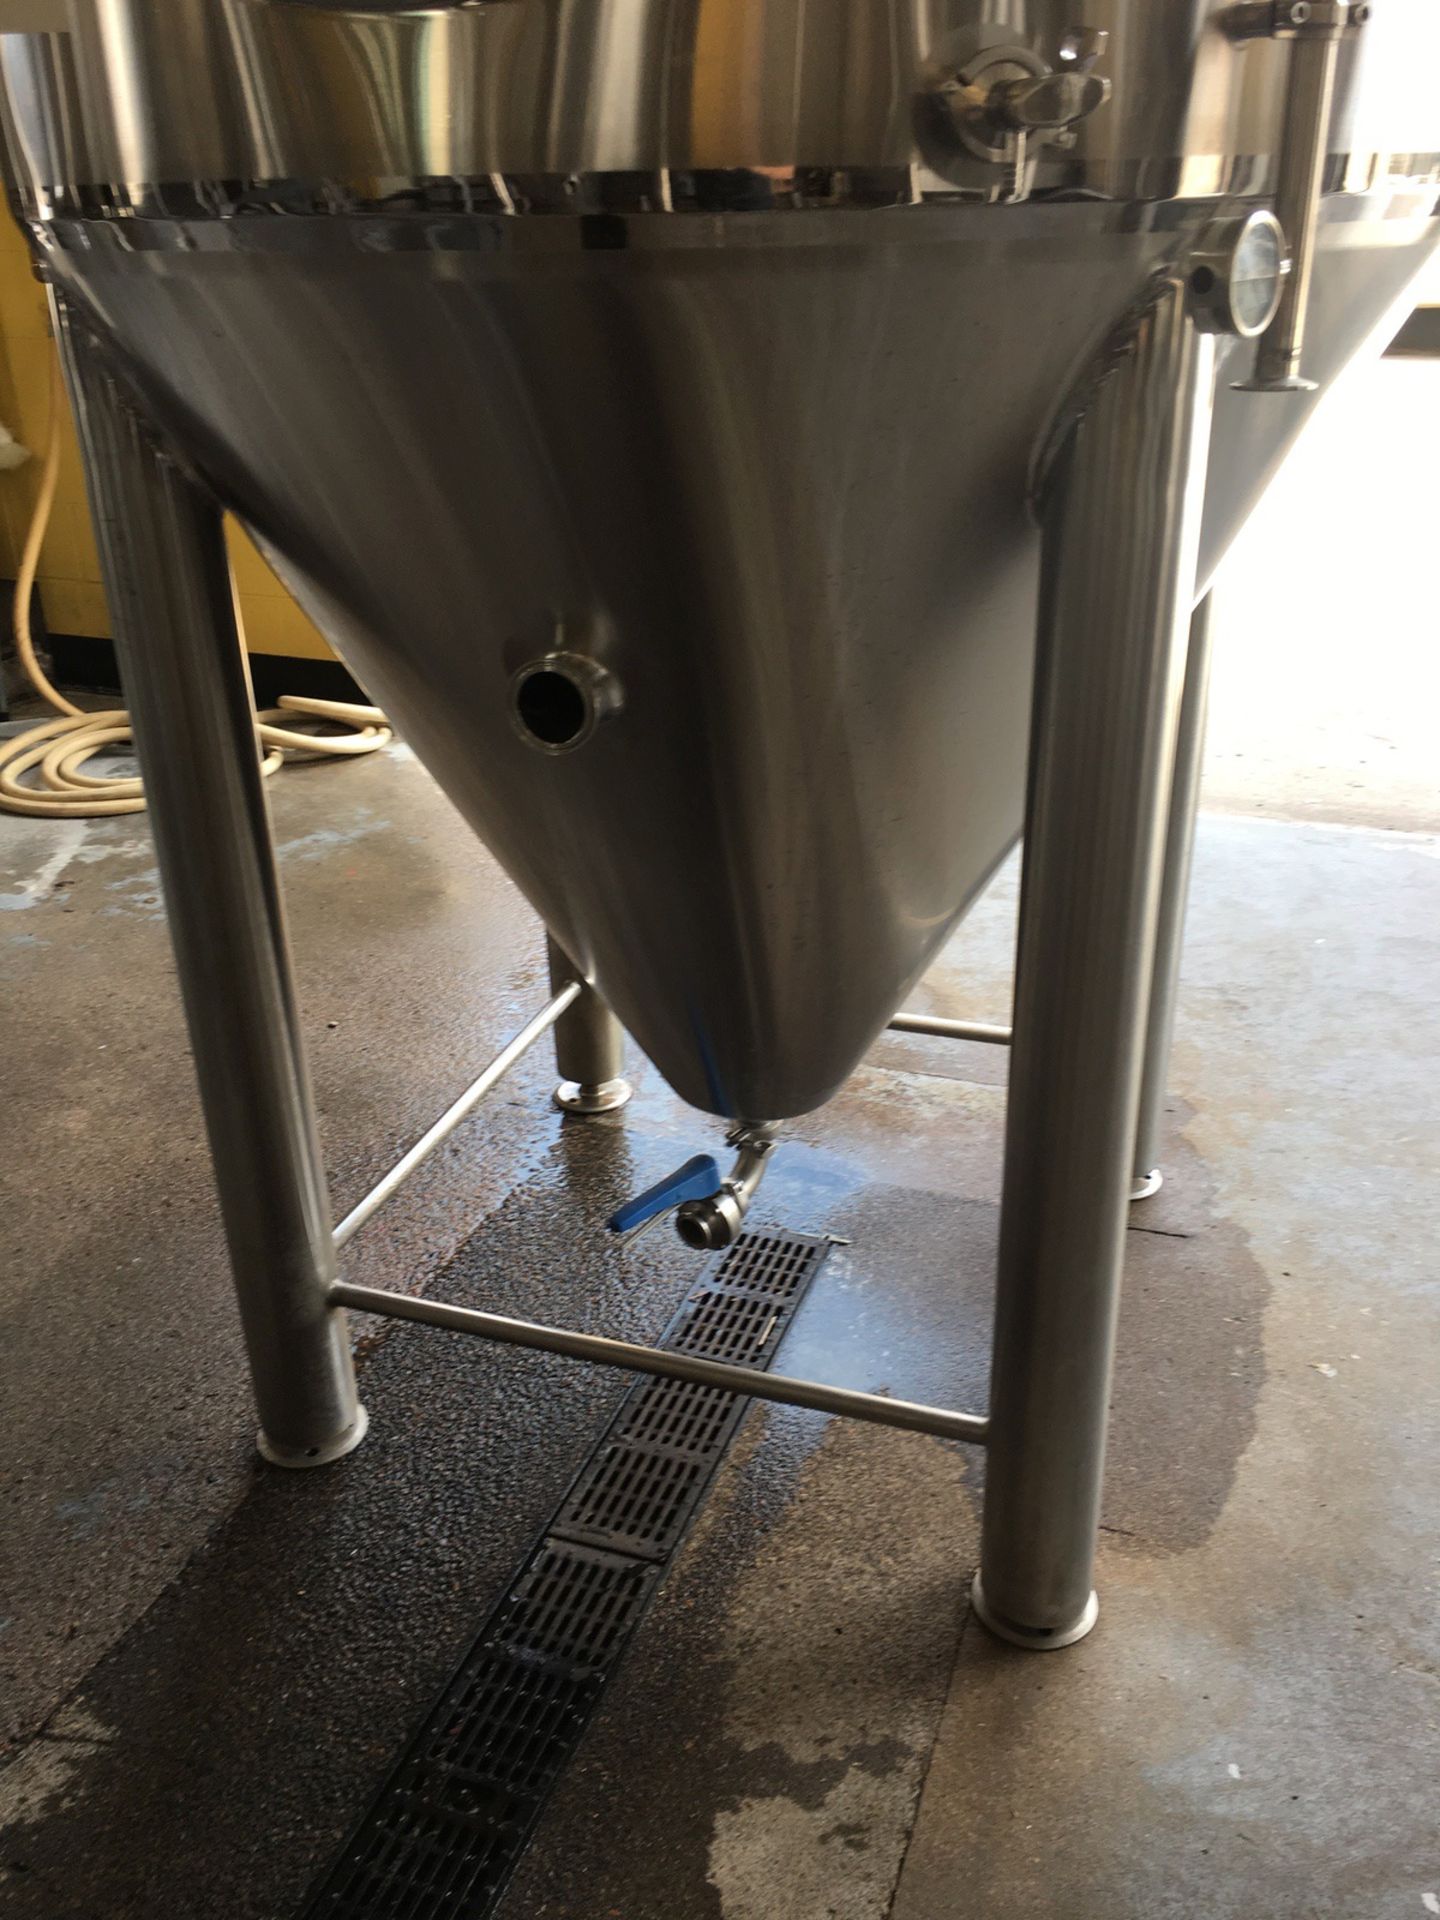 2015 Stout 14 BBL Fermentation Vessel, Stainless Steel, Glycol J | Subject to Bulk | Rig Fee: $350 - Image 2 of 9